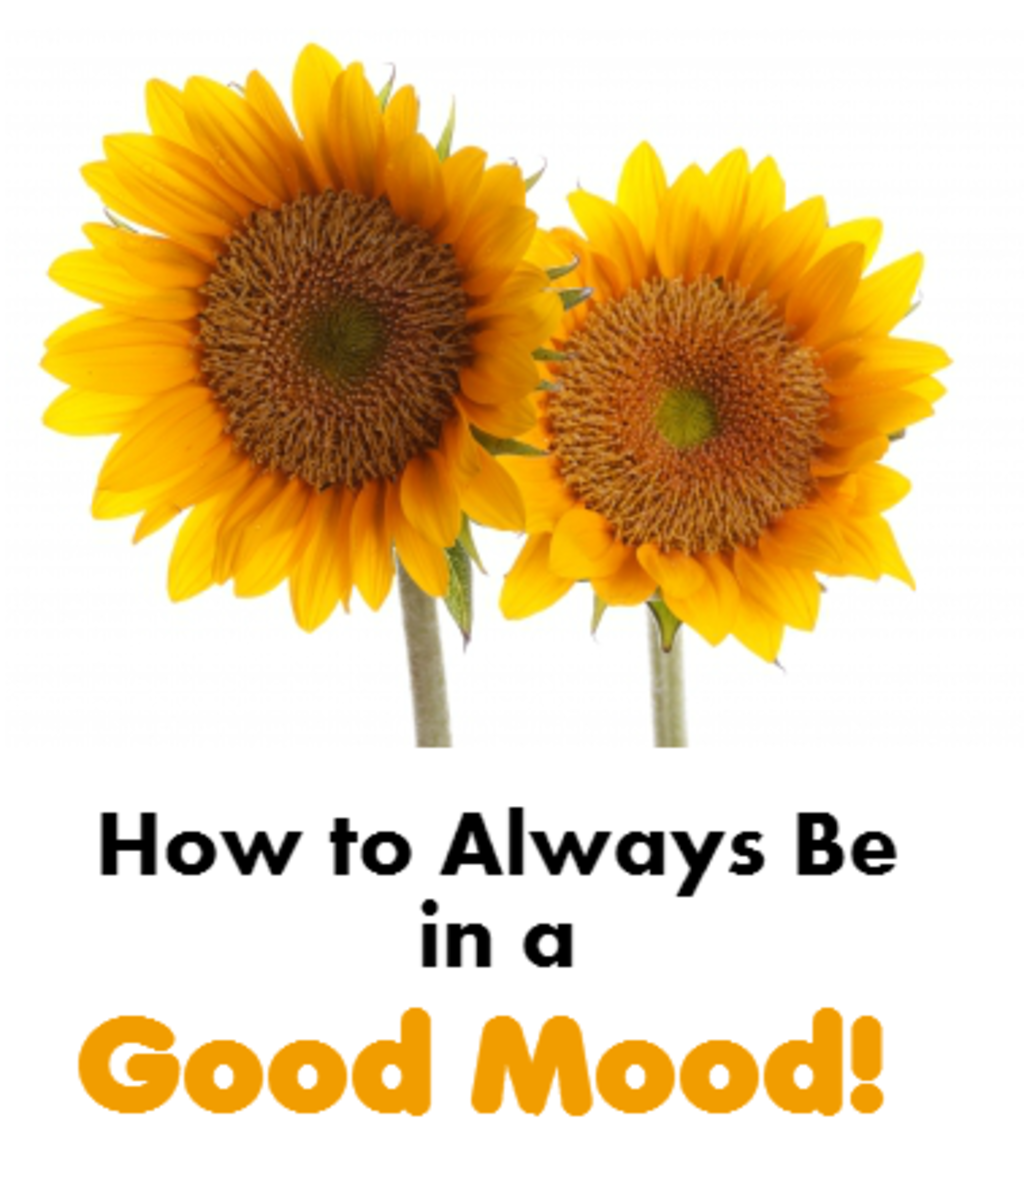 How to Always Be in a Good Mood - 21 Tips